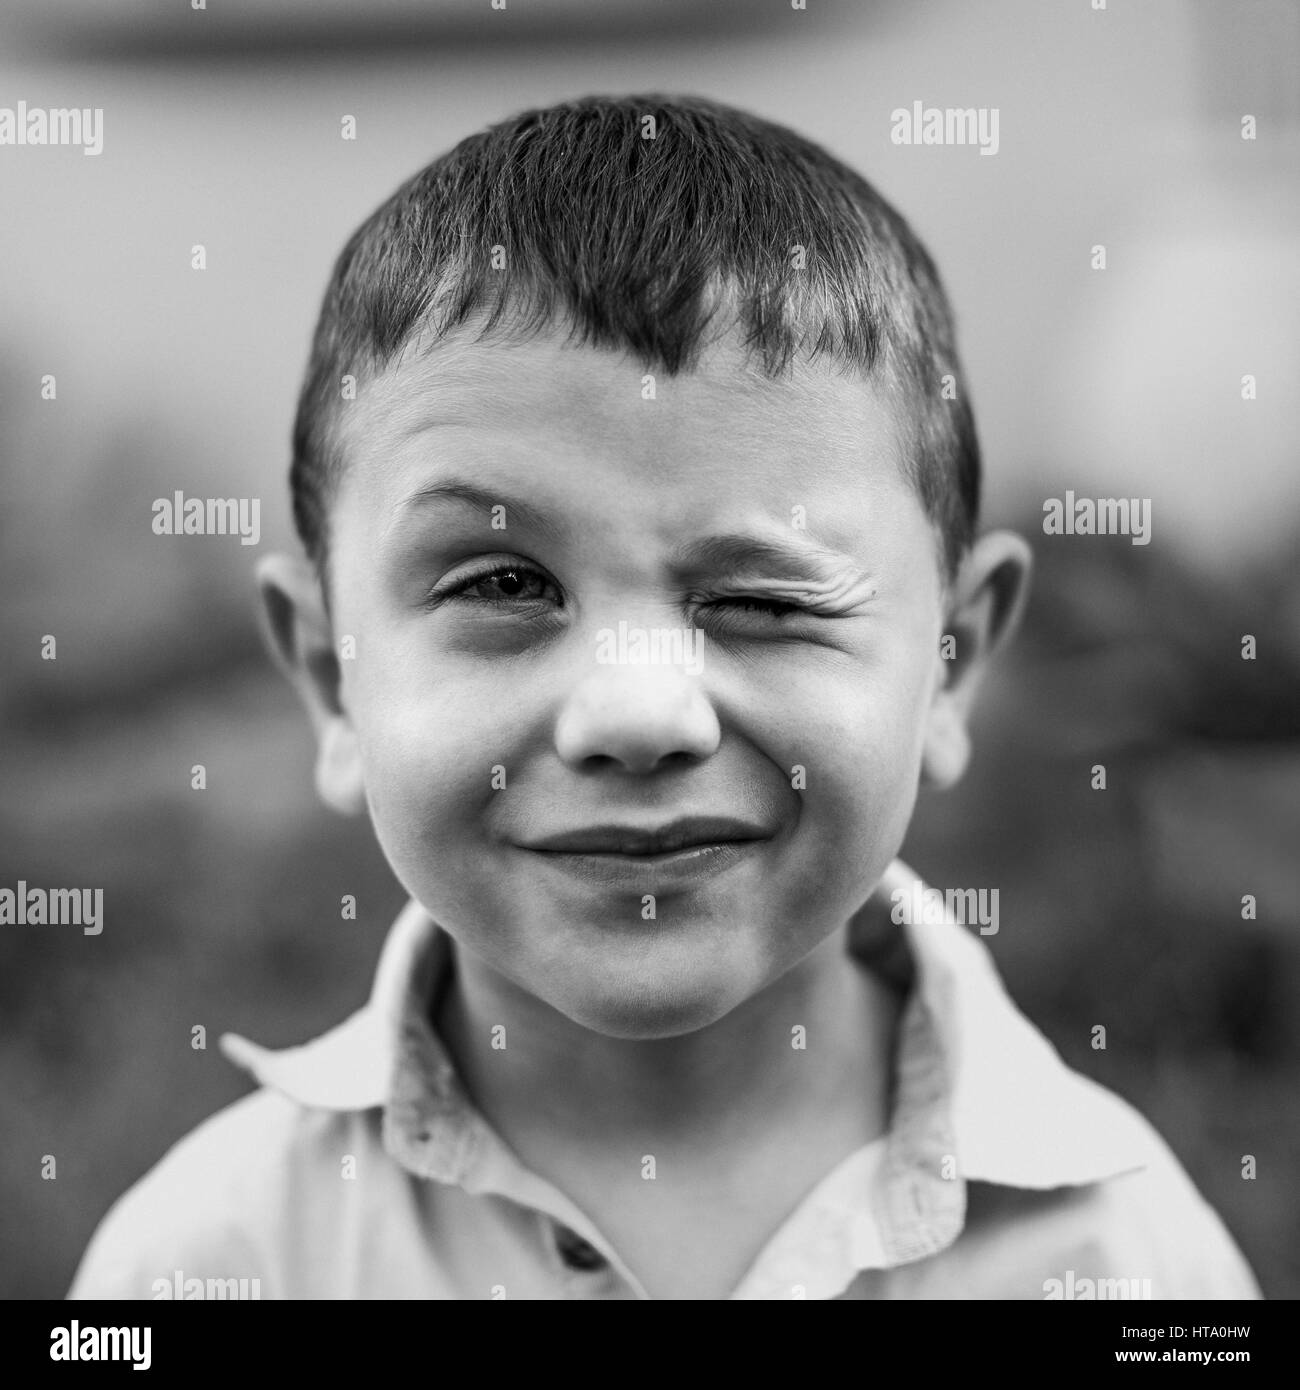 Black and white portrait of a winking boy Stock Photo